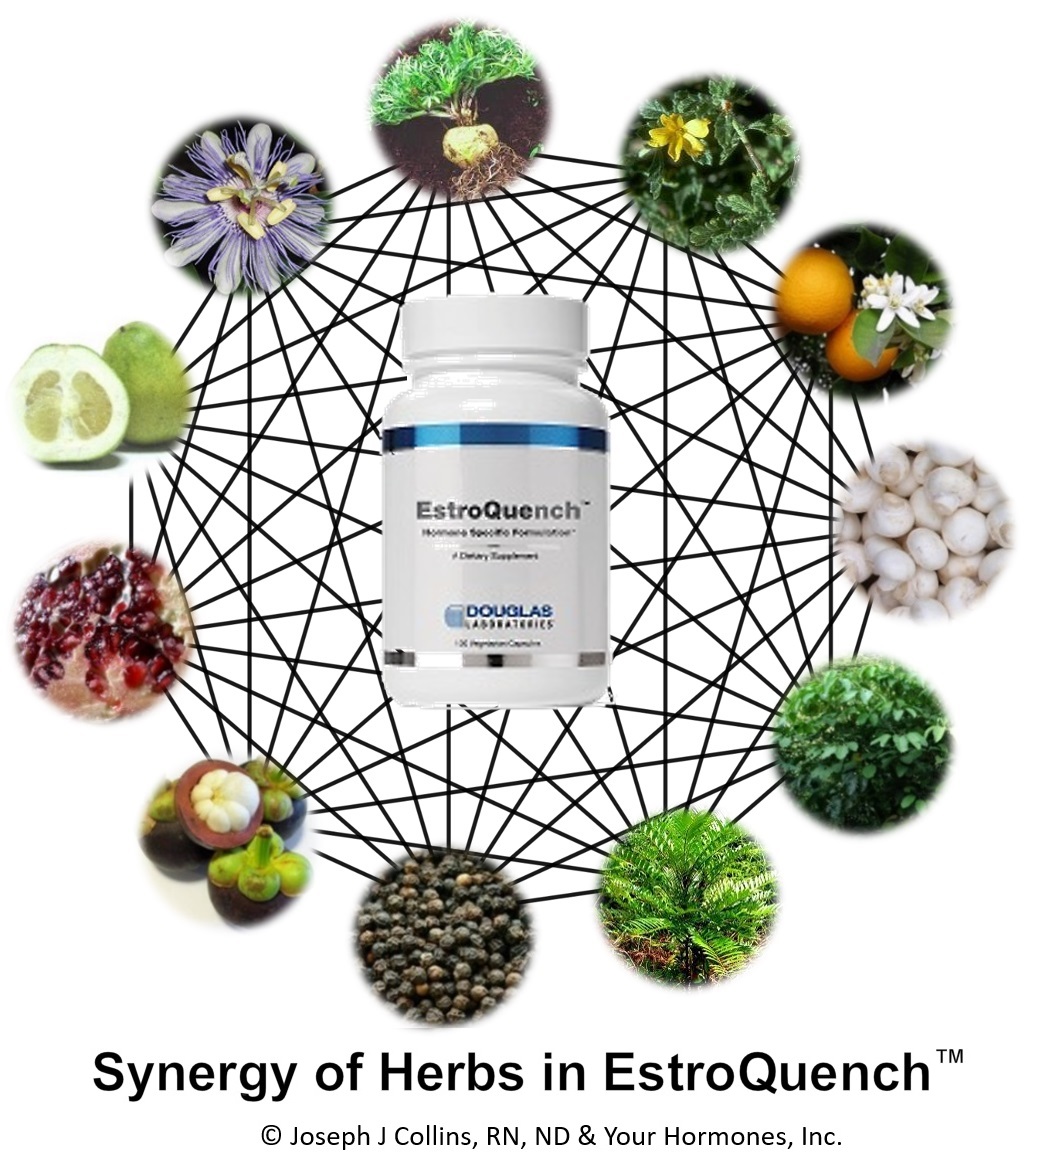 Synergy of Herbs in EstroQuench™